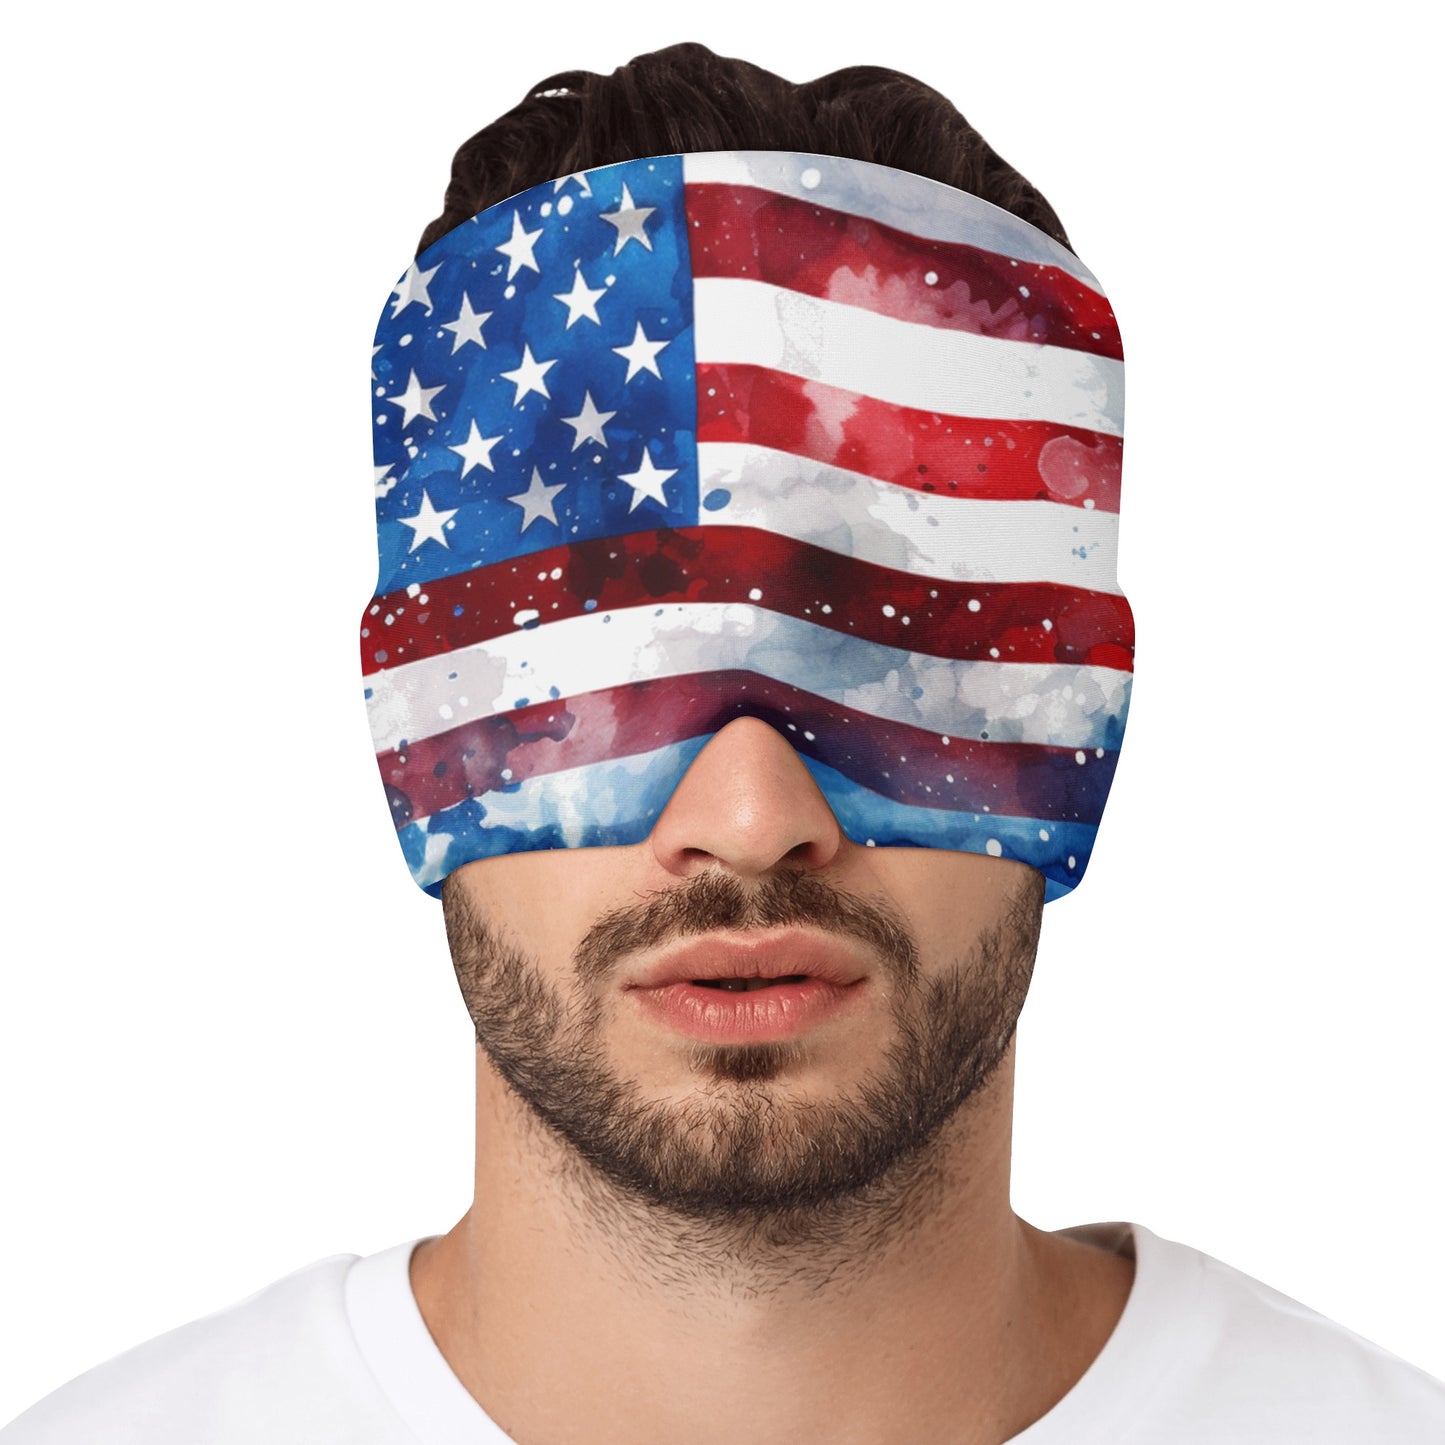 Neduz Designs Global Collection - Watercolor American Flag Ice Head Wrap for Patriots Day